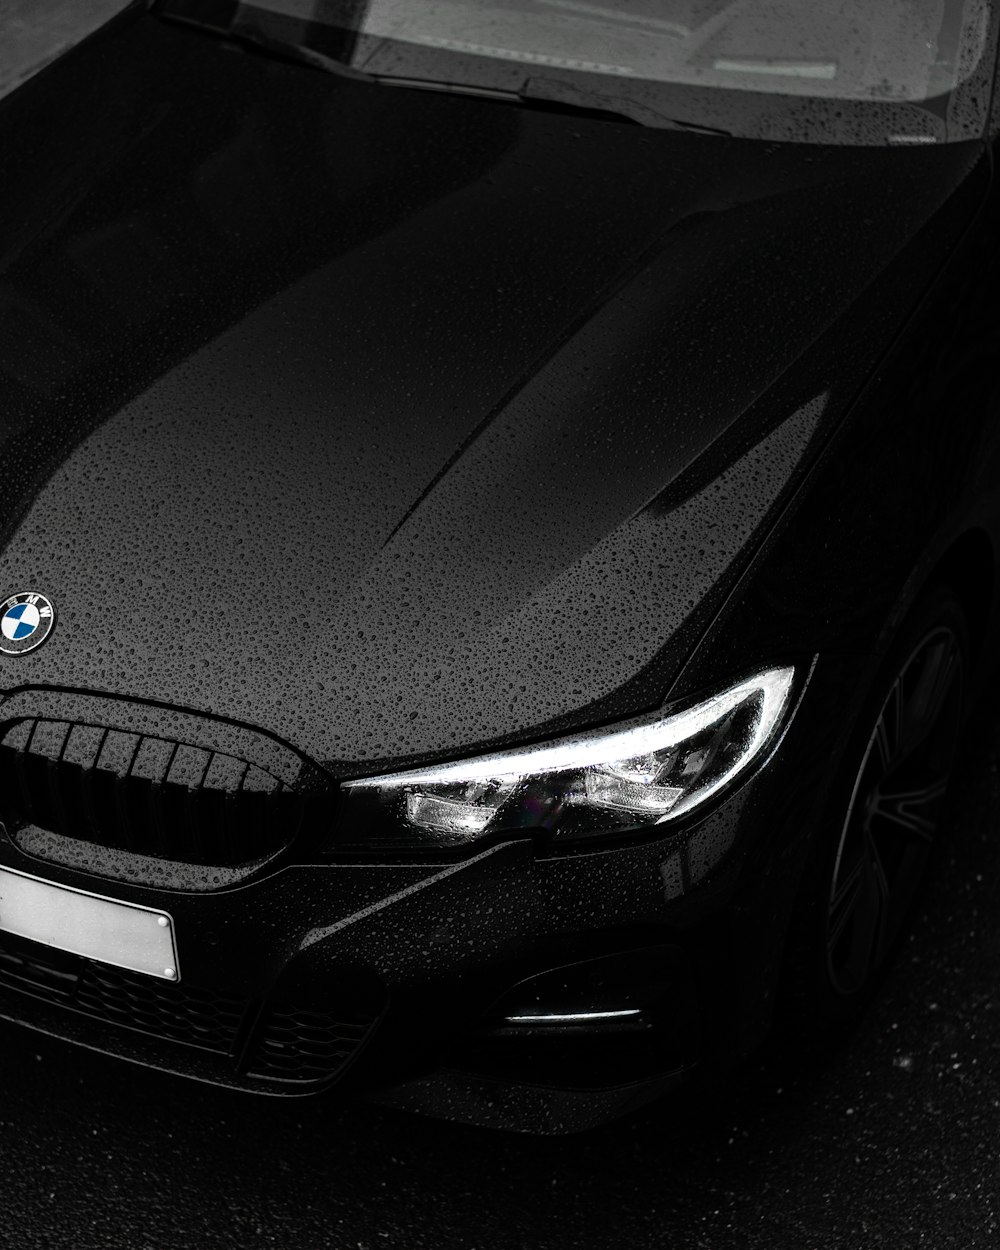 black bmw car in close up photography